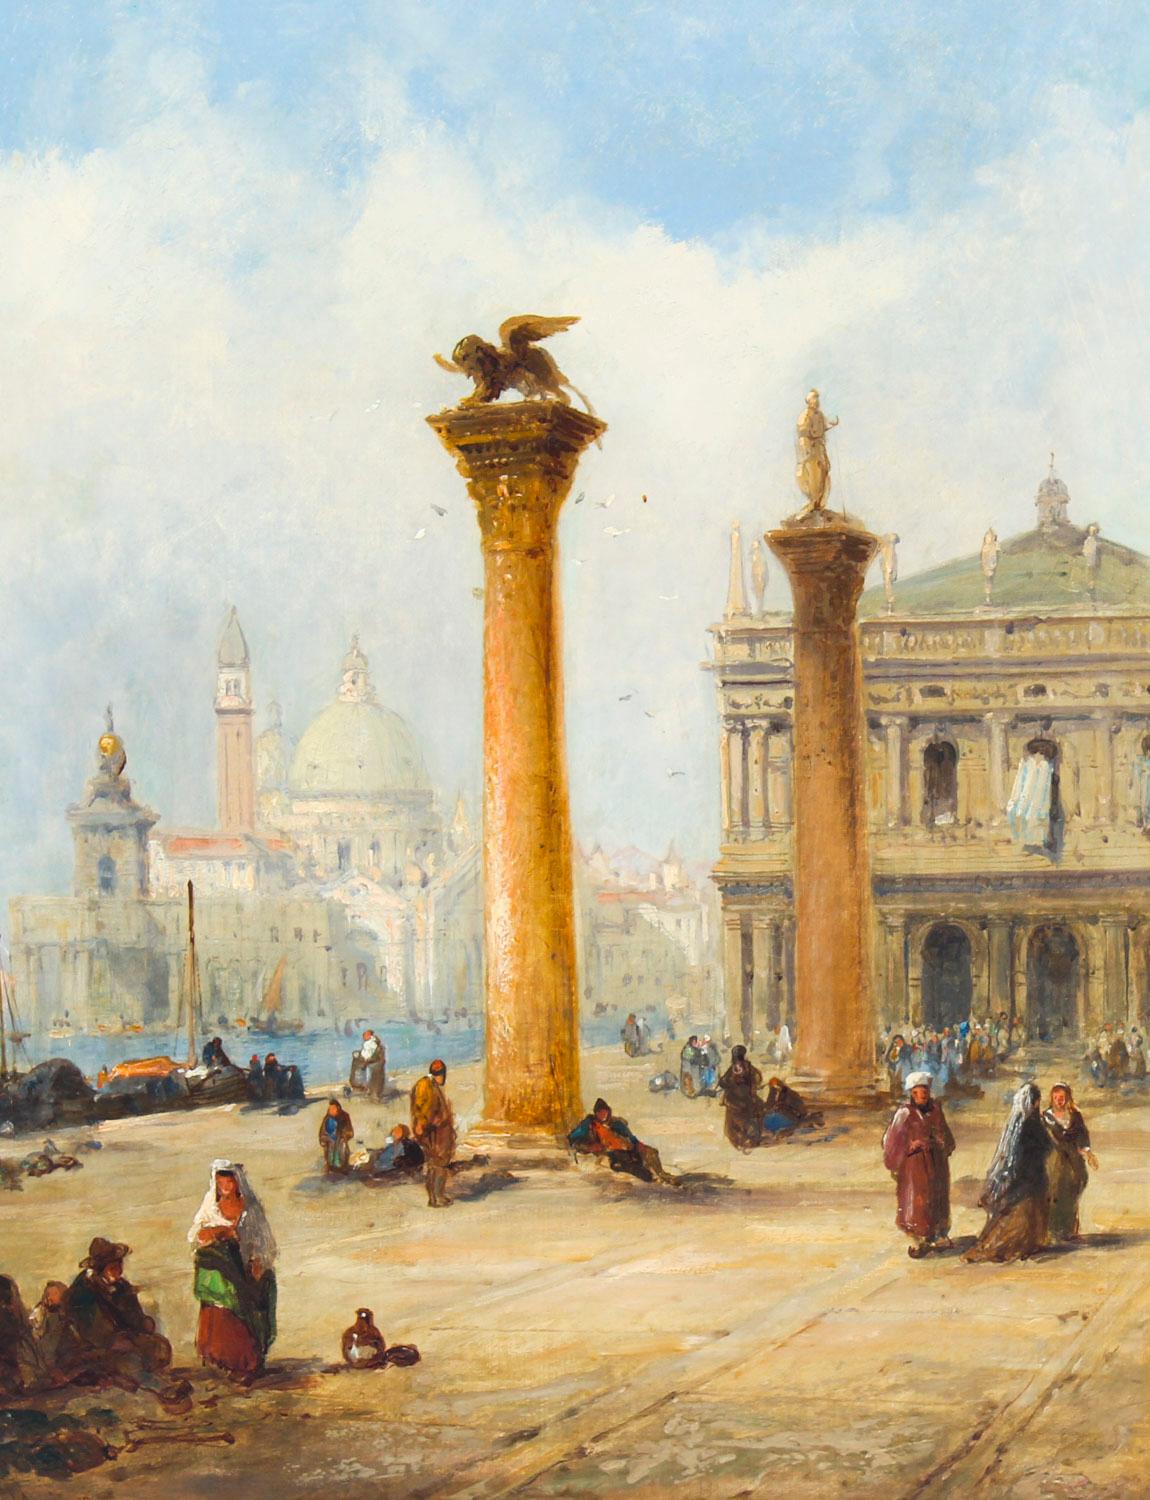 This lovely oil on canvas painting by Jane Vivian (Active 1869-1890) beautifully captures the Columns of San Marco and San Teodoro Venice signed on the lower right.

The painting delightfully presents the view of Marciana Library with the Columns of